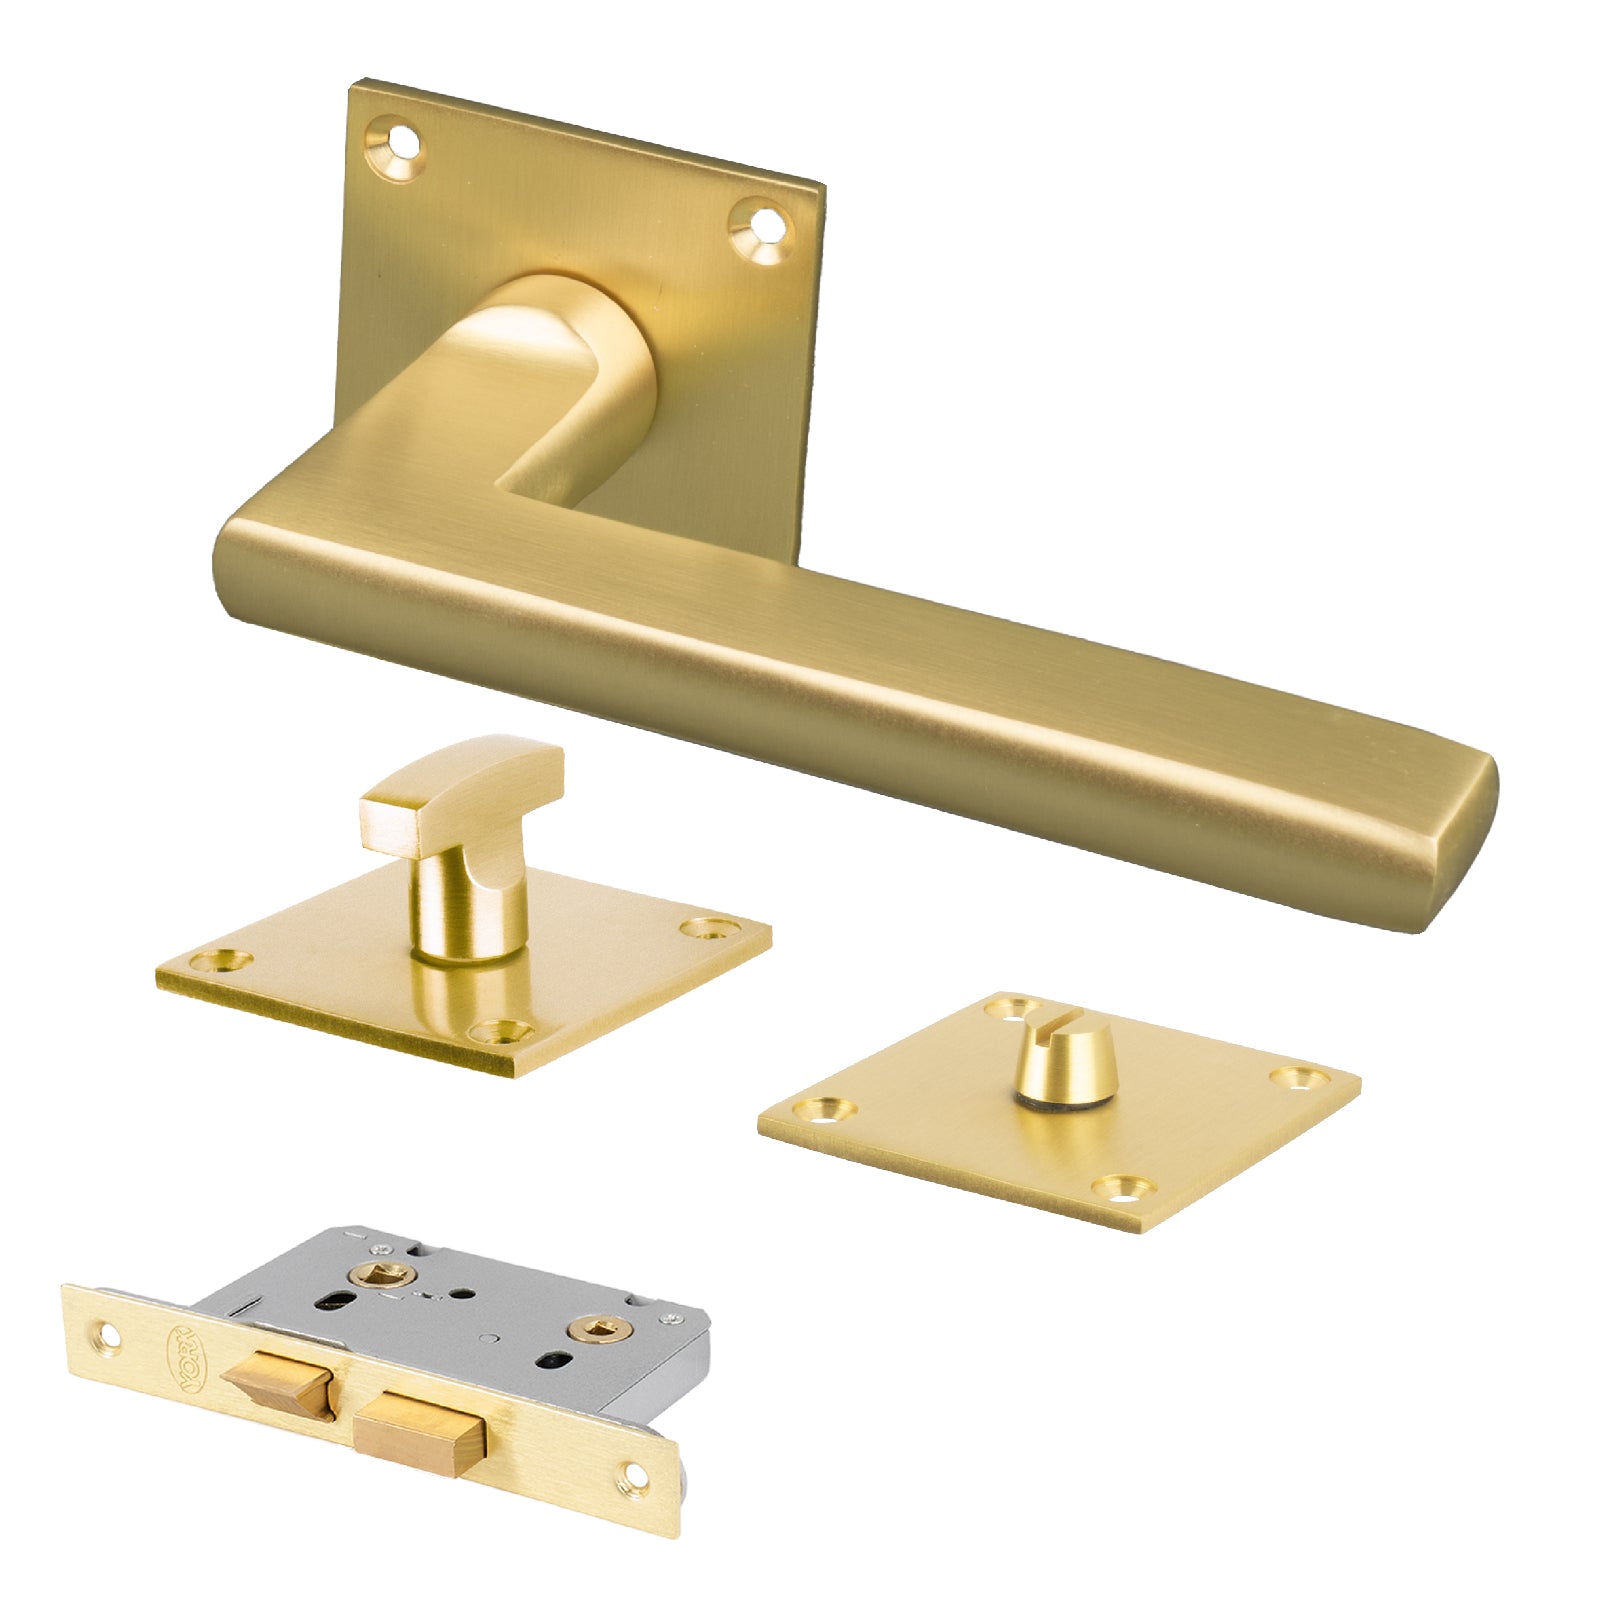 SHOW Trident Square Rose Door Handles Bathroom Set with Satin Brass finish